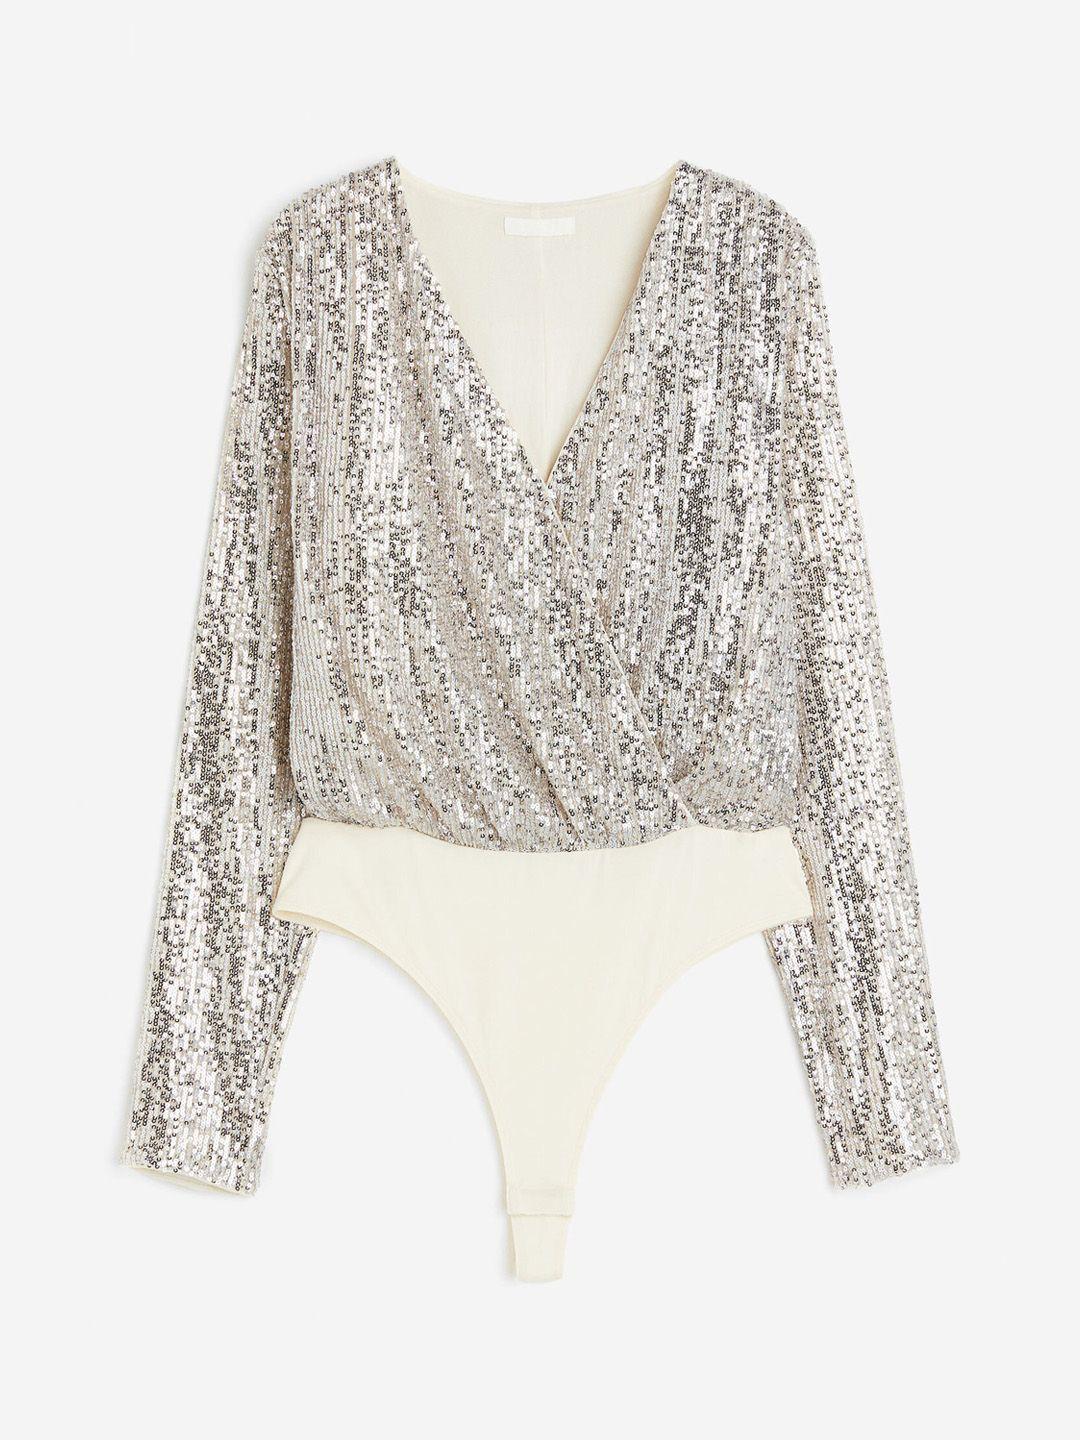 h&m sequined body